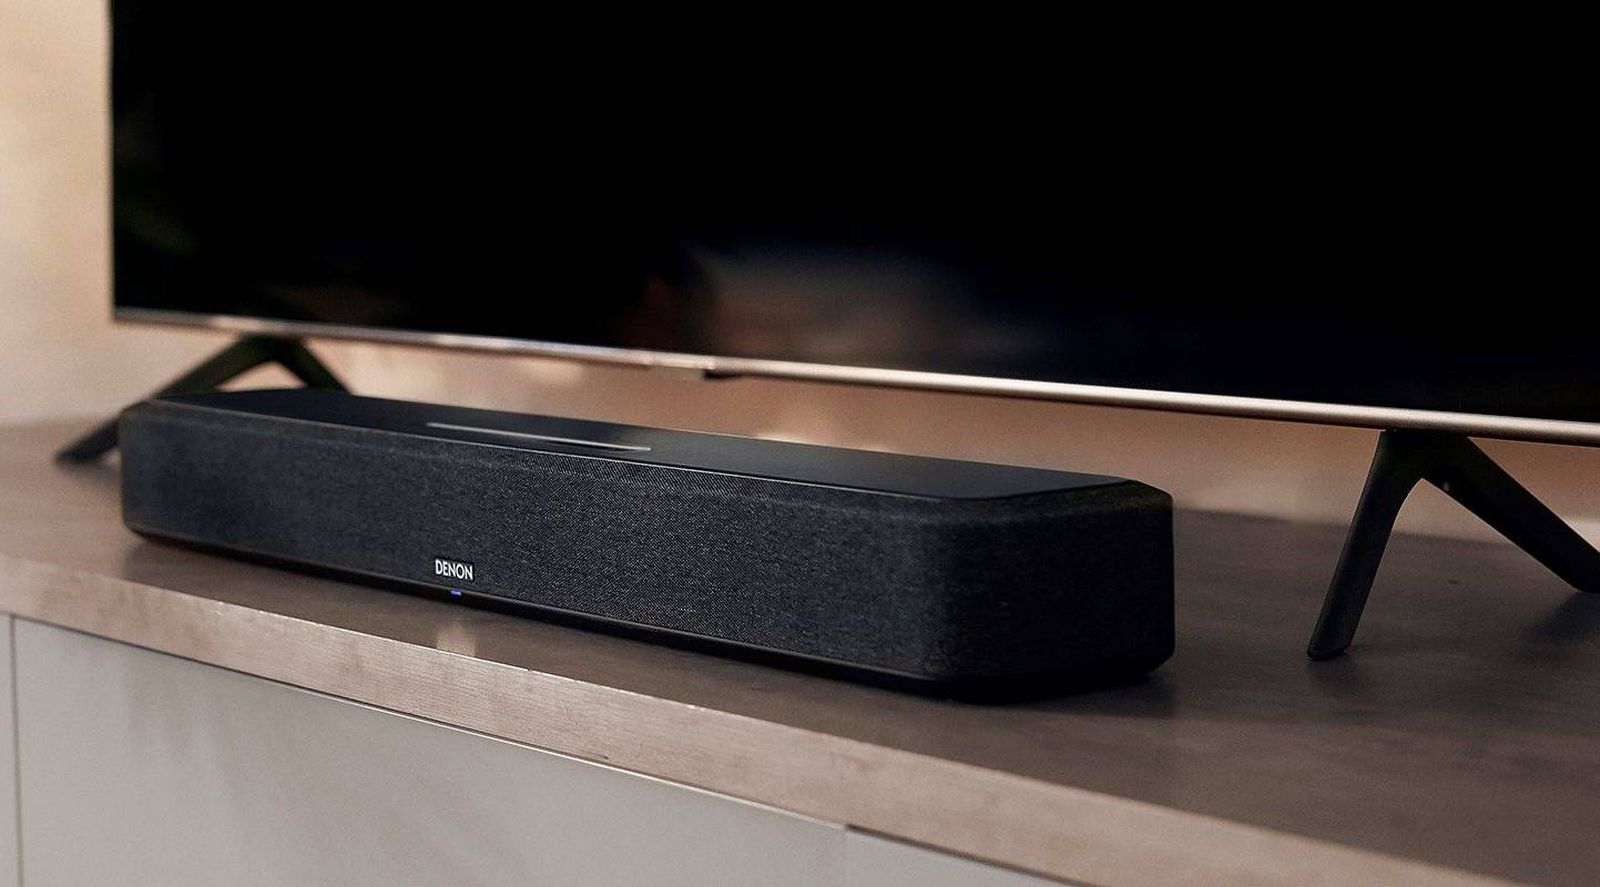 Denon introduces a new soundbar with Dolby Atmos, AirPlay 2 support and more